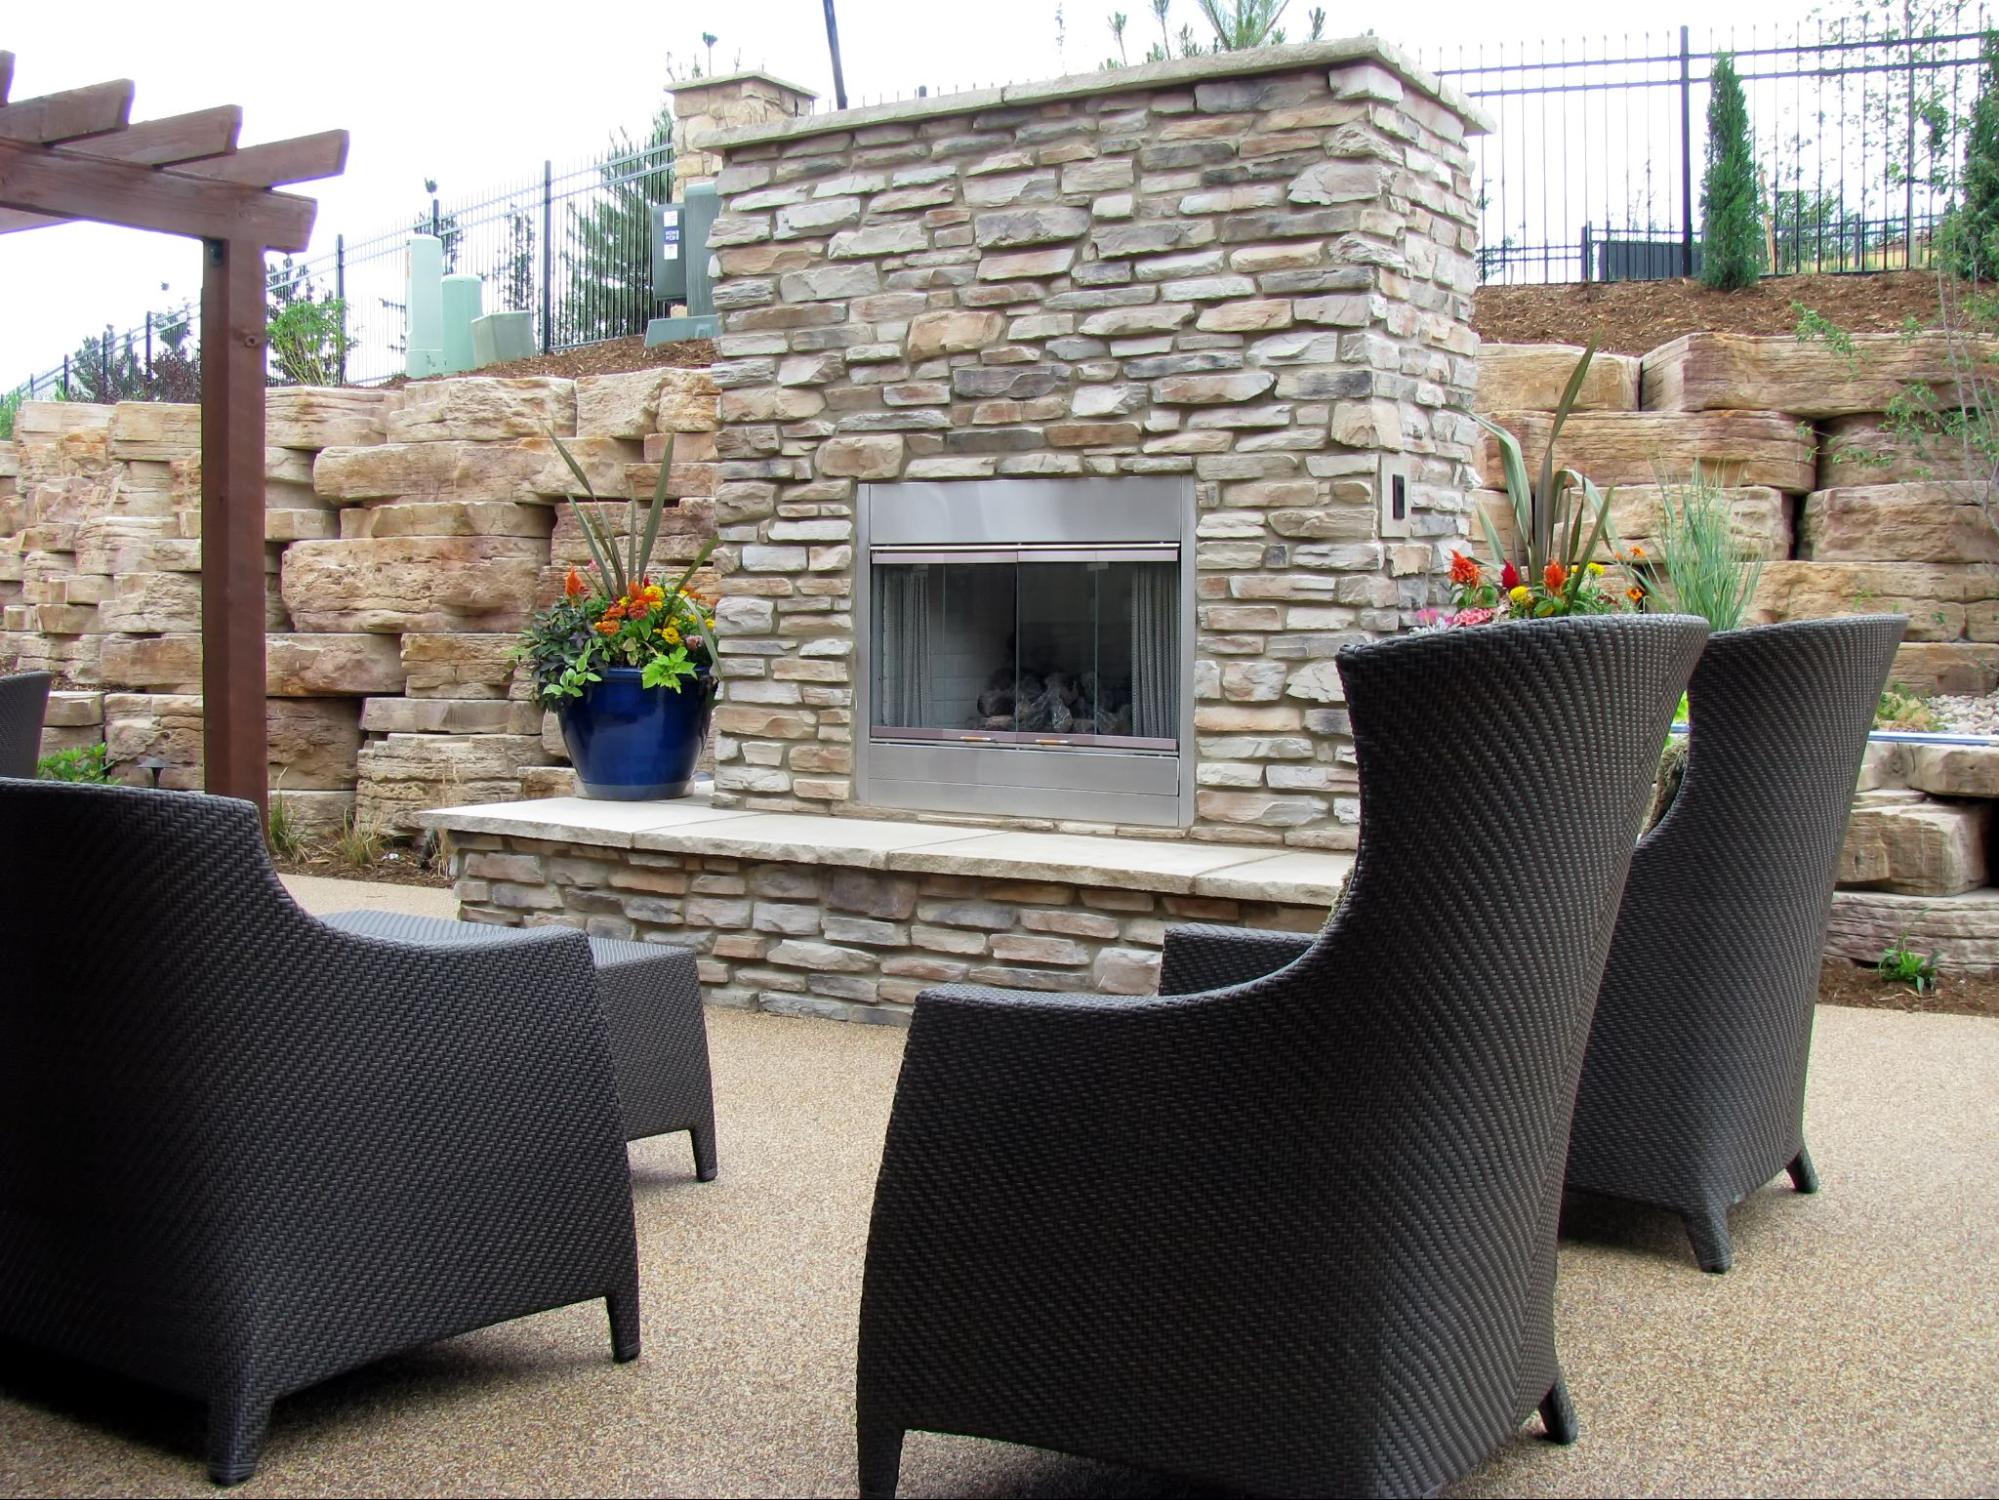 Are Outdoor Fireplaces Safe?